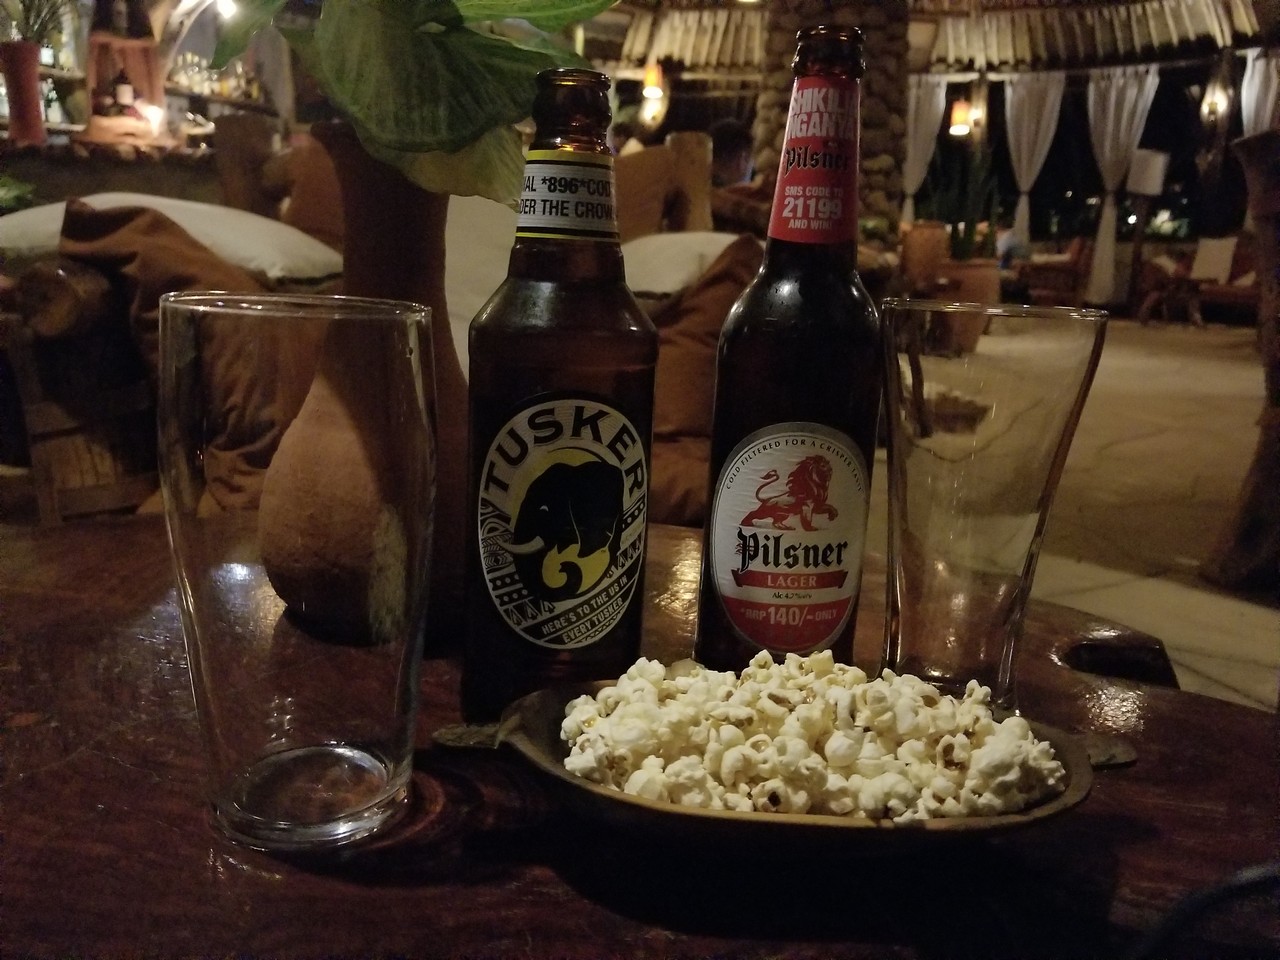 a plate of popcorn and bottles of beer on a table